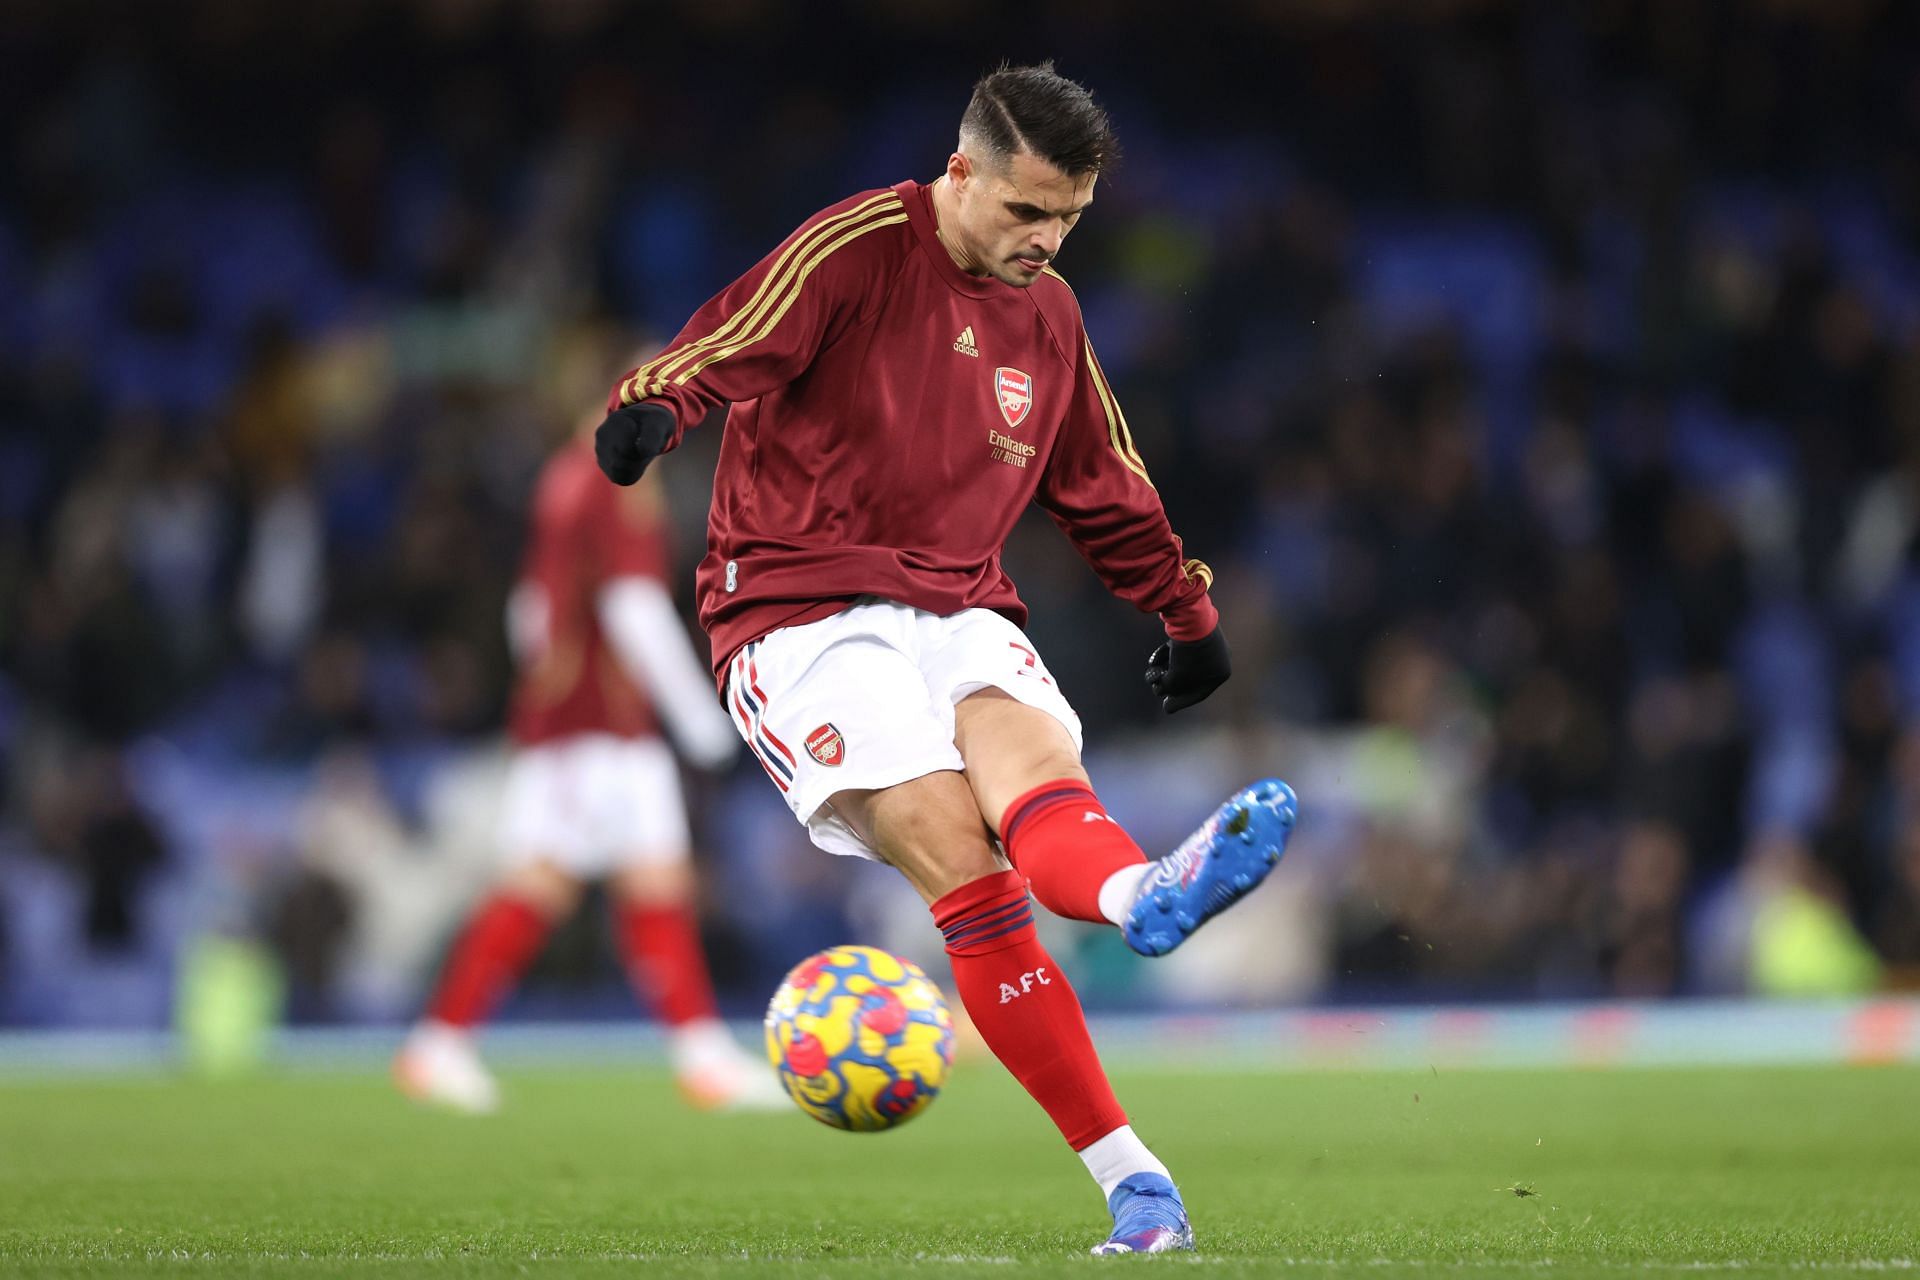 AS Roma have retained their interest in Swiss midfielder Granit Xhaka.